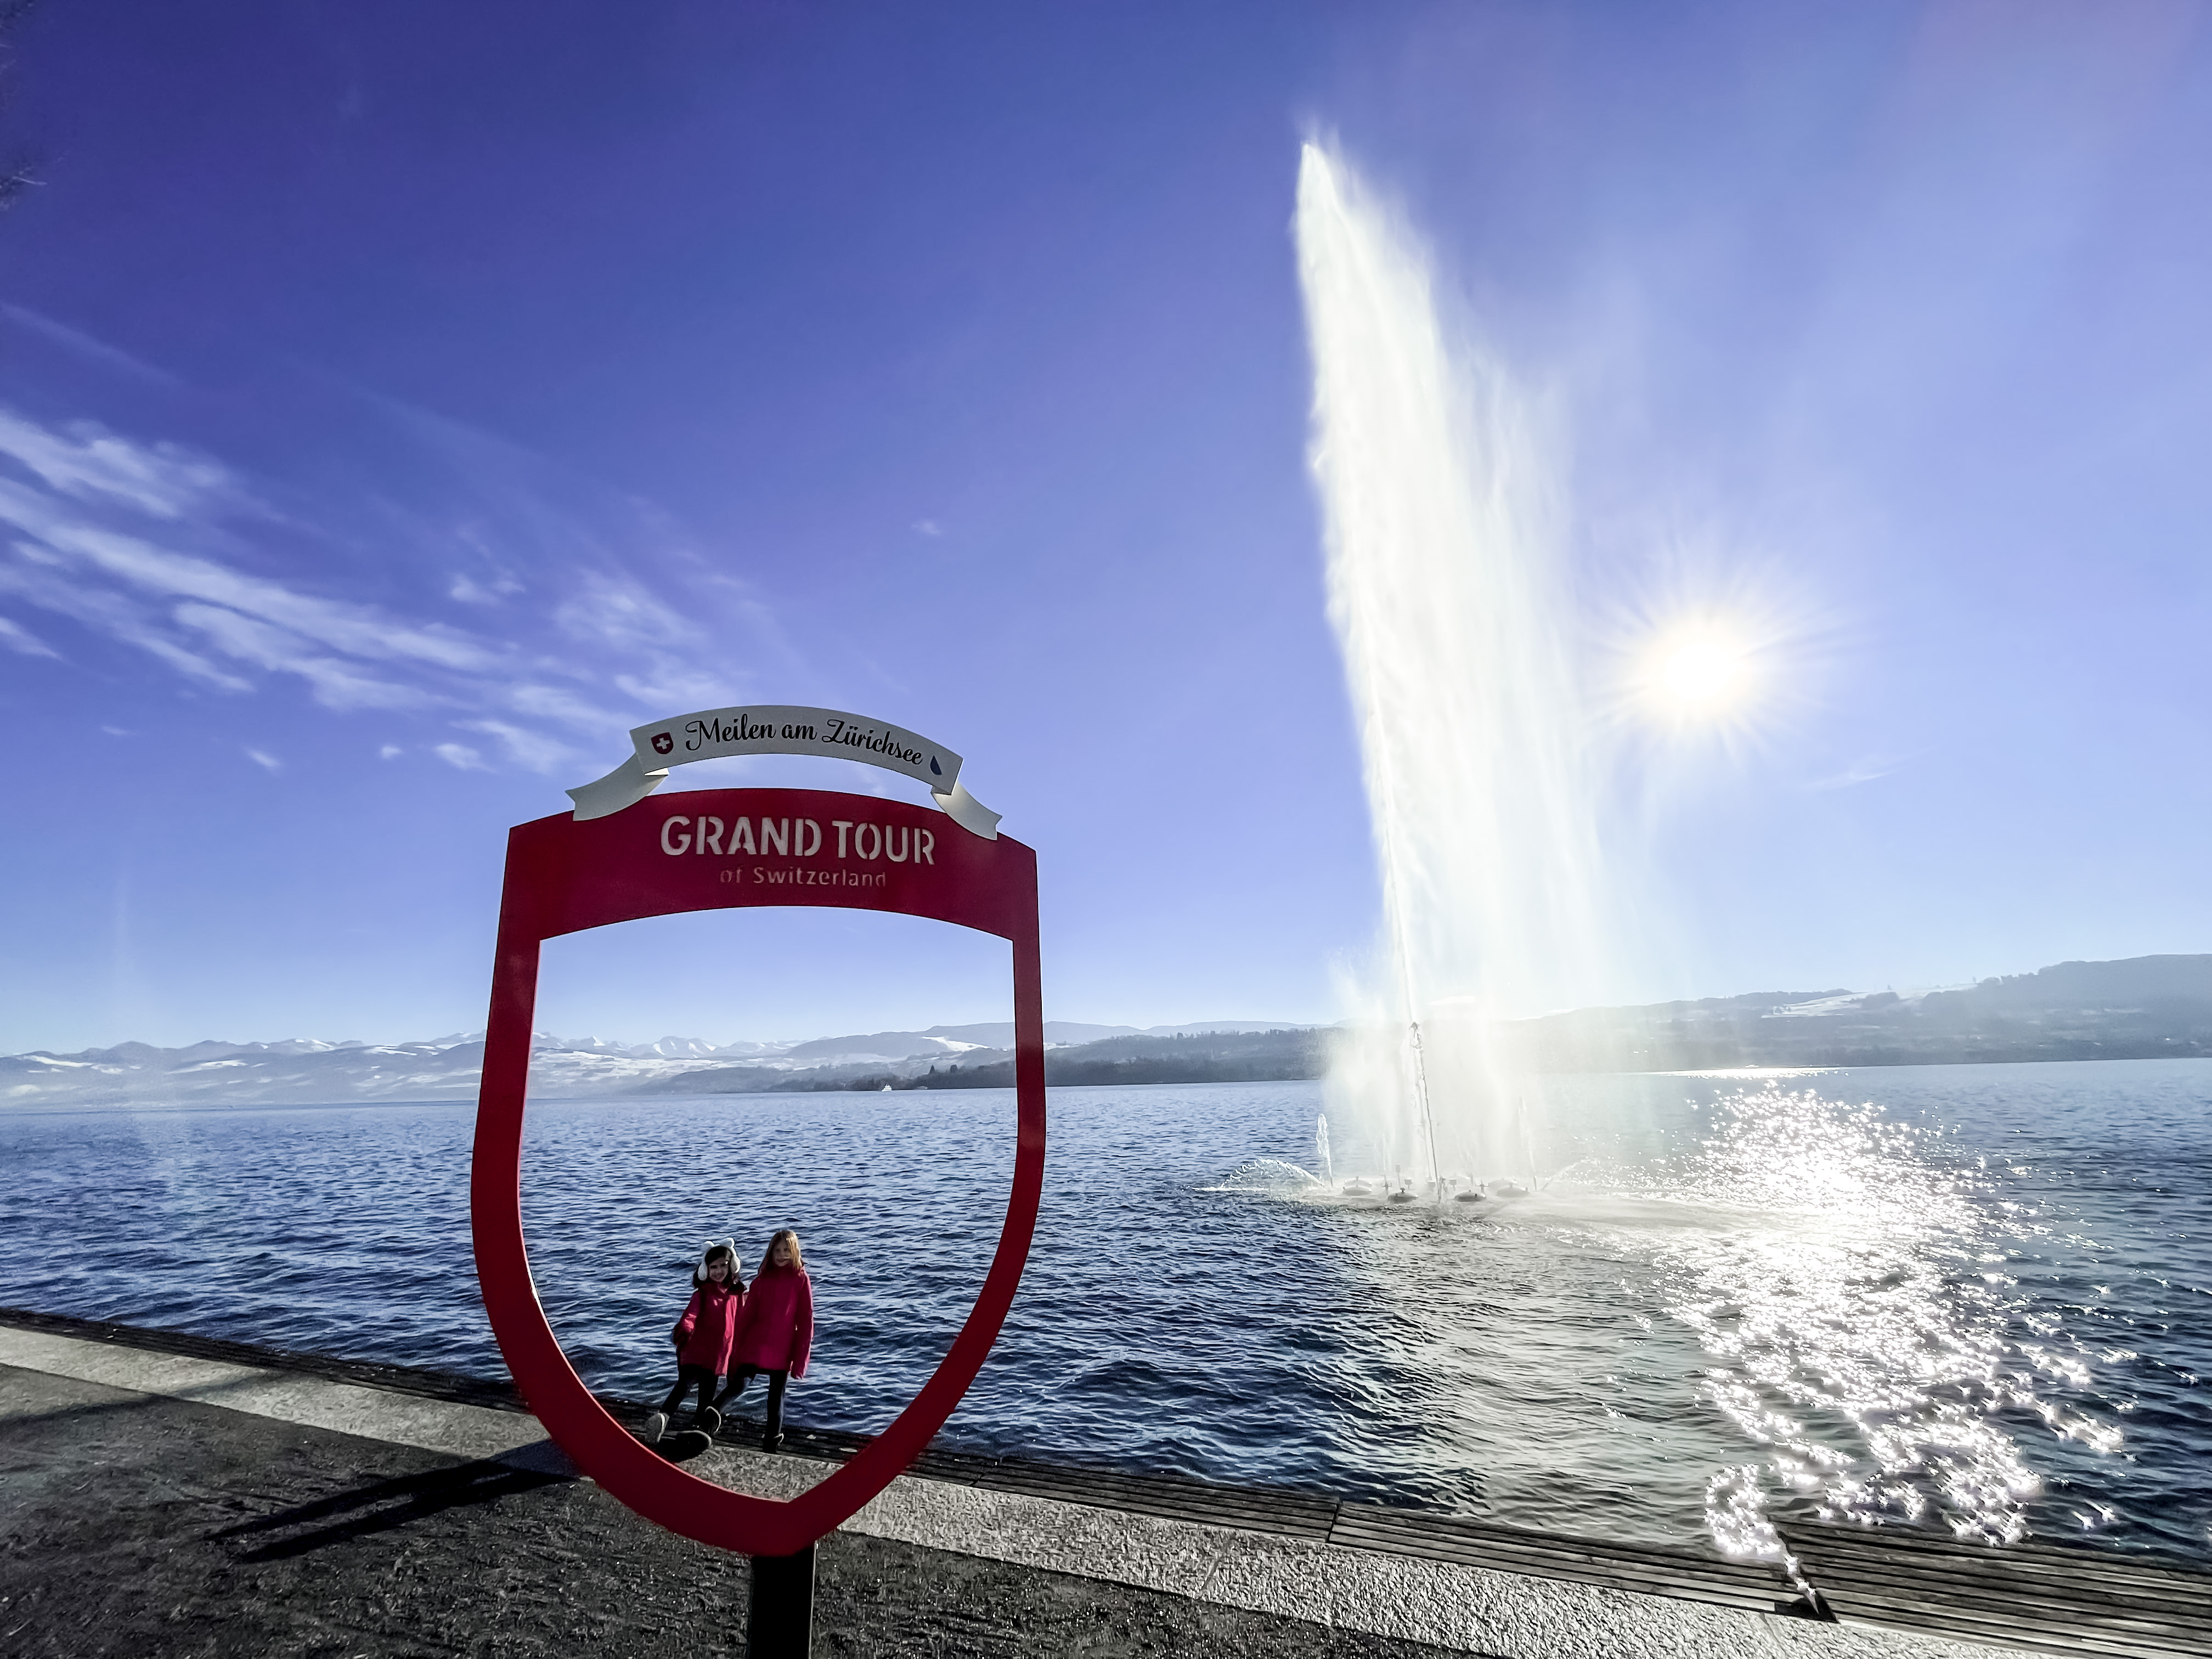 VISITING 40 PHOTO SPOTS ON THE GRAND TOUR OF SWITZERLAND